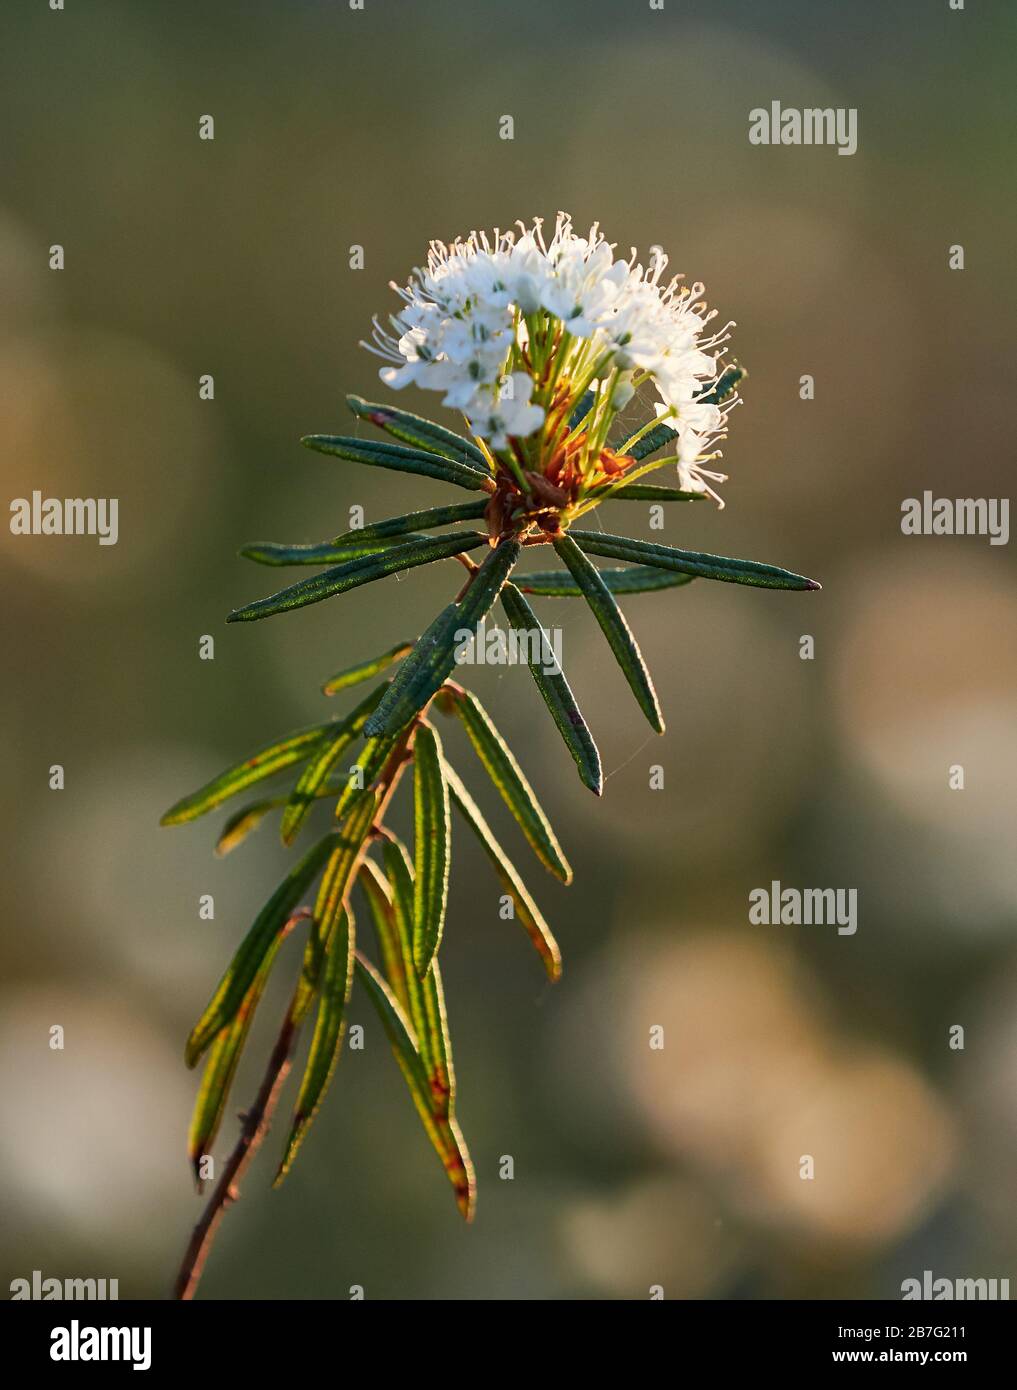 Closeup of marsh Labrador tea, Rhododendron tomentosum plant in the autumn sunlight. Selective focus, blurred background. Vertical image. Stock Photo